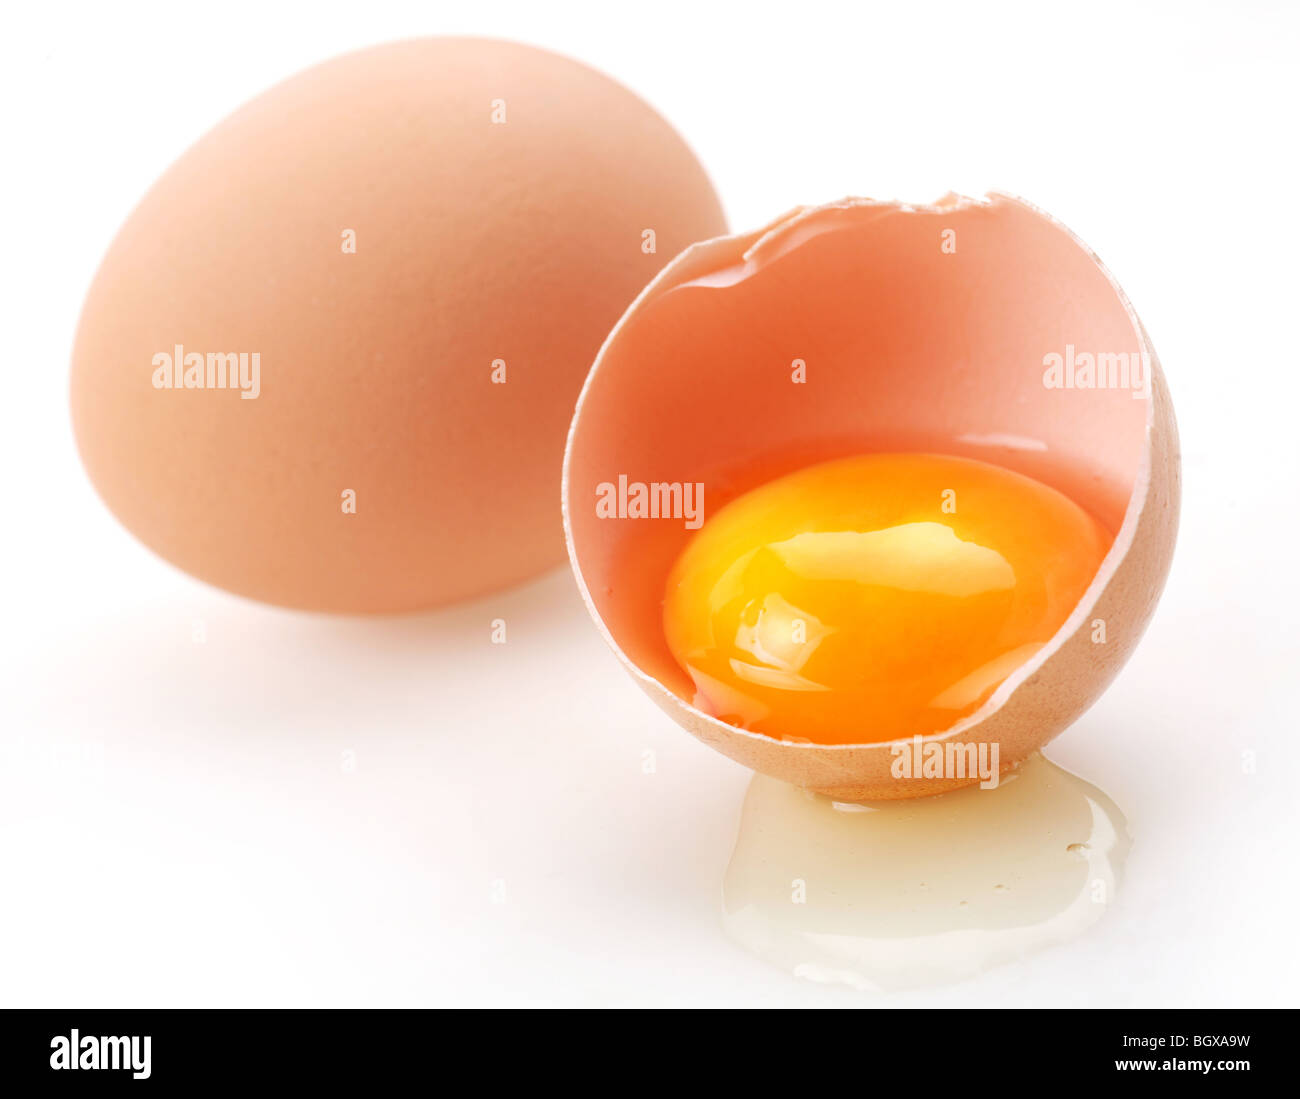 With brown eggs on a white background. One egg is broken. Stock Photo